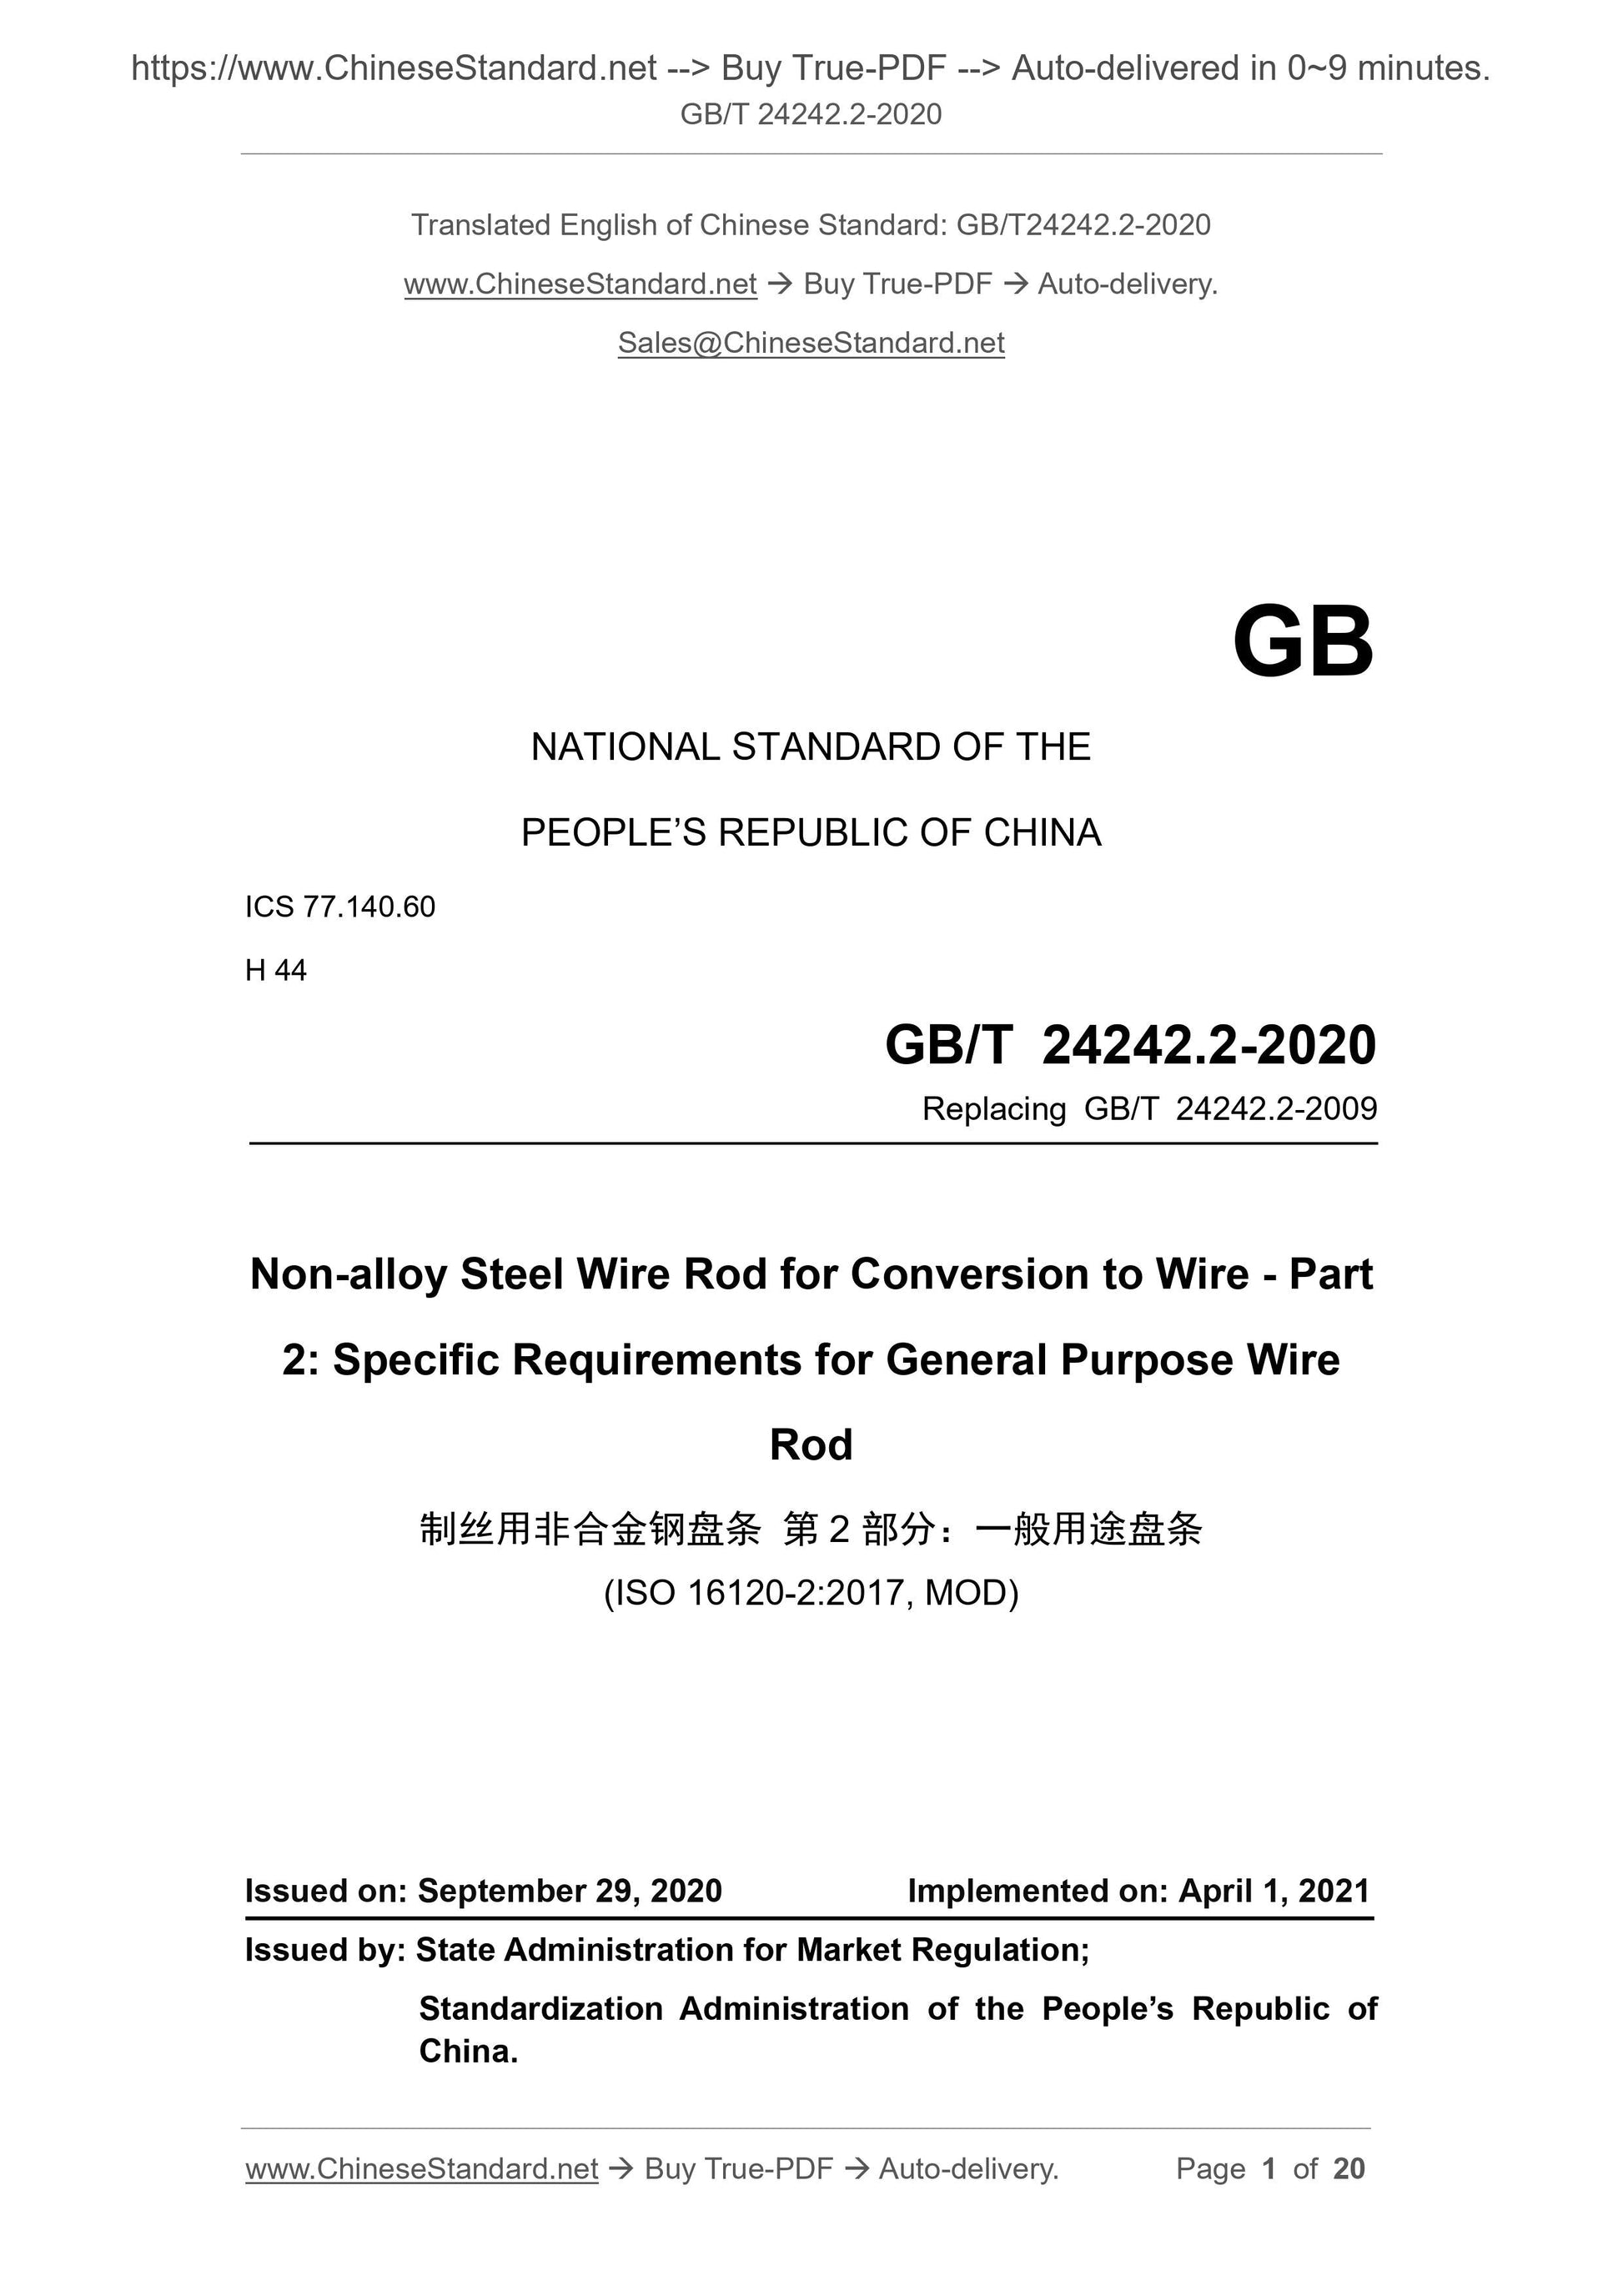 GB/T 24242.2-2020 Page 1